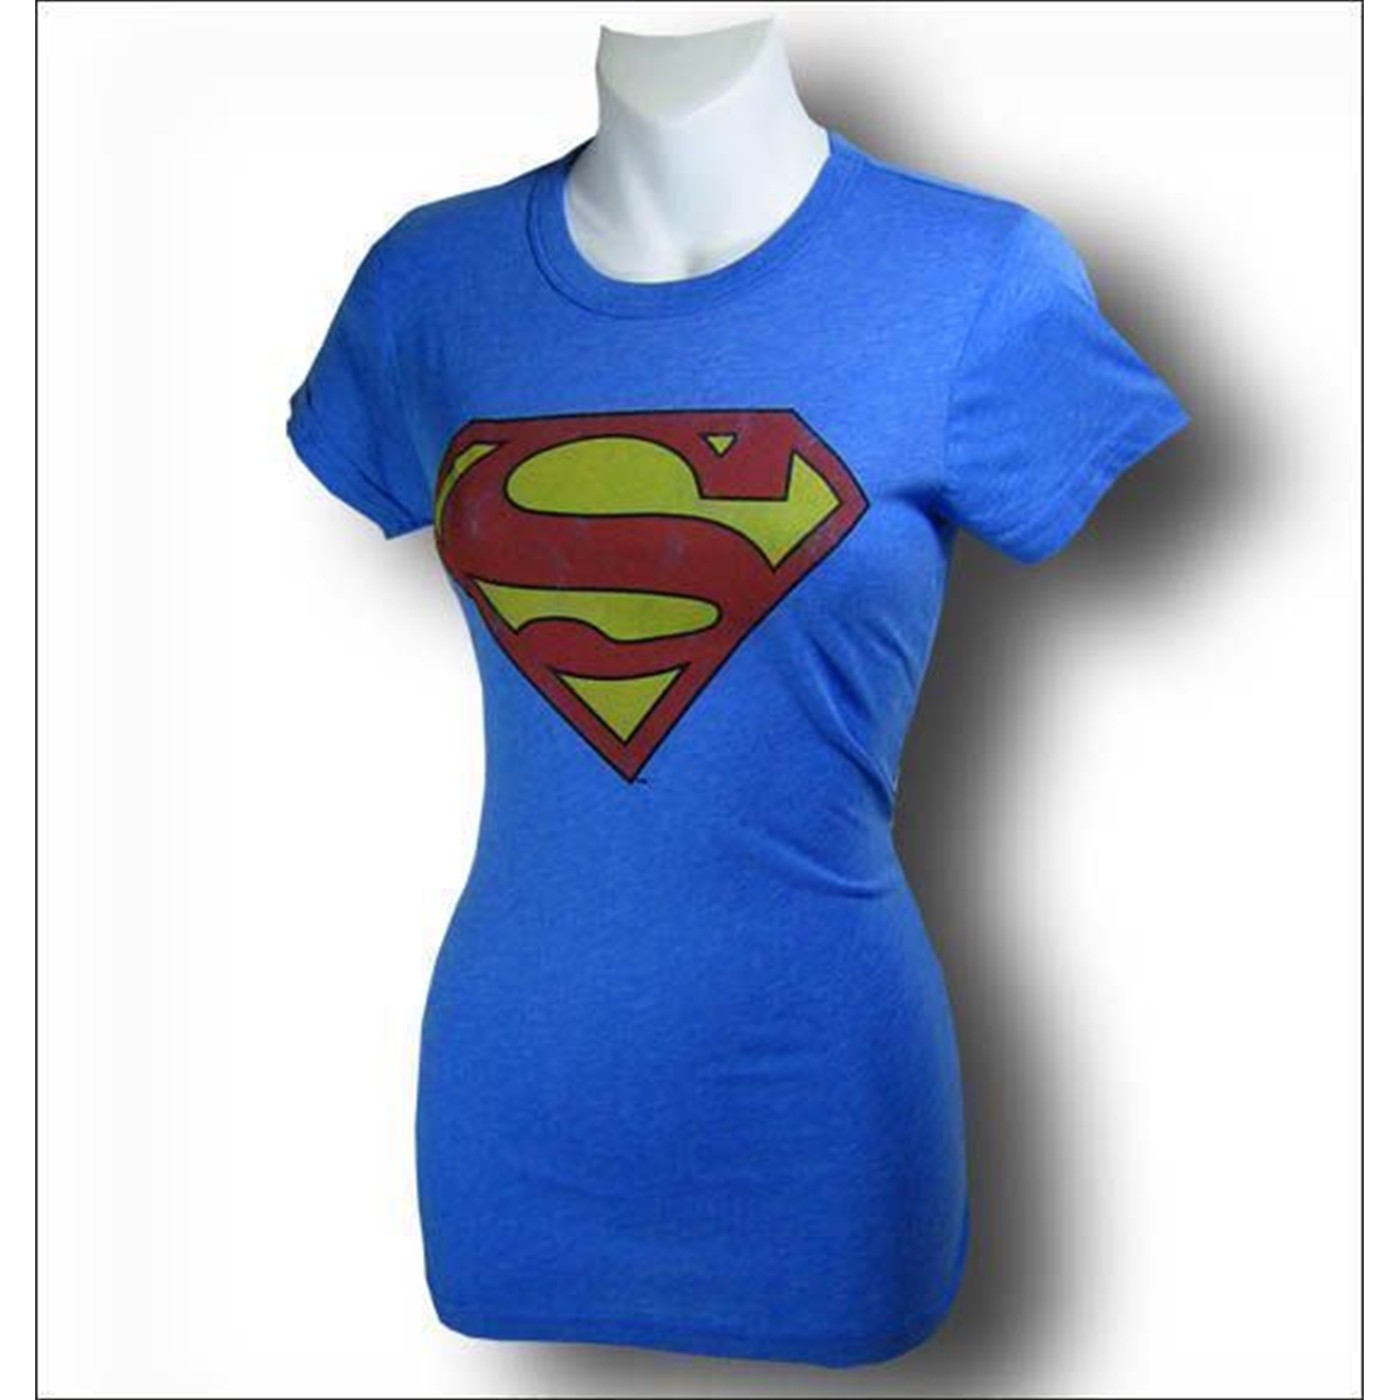 Supergirl Women's  Blueberry T-Shirt by Junk Food